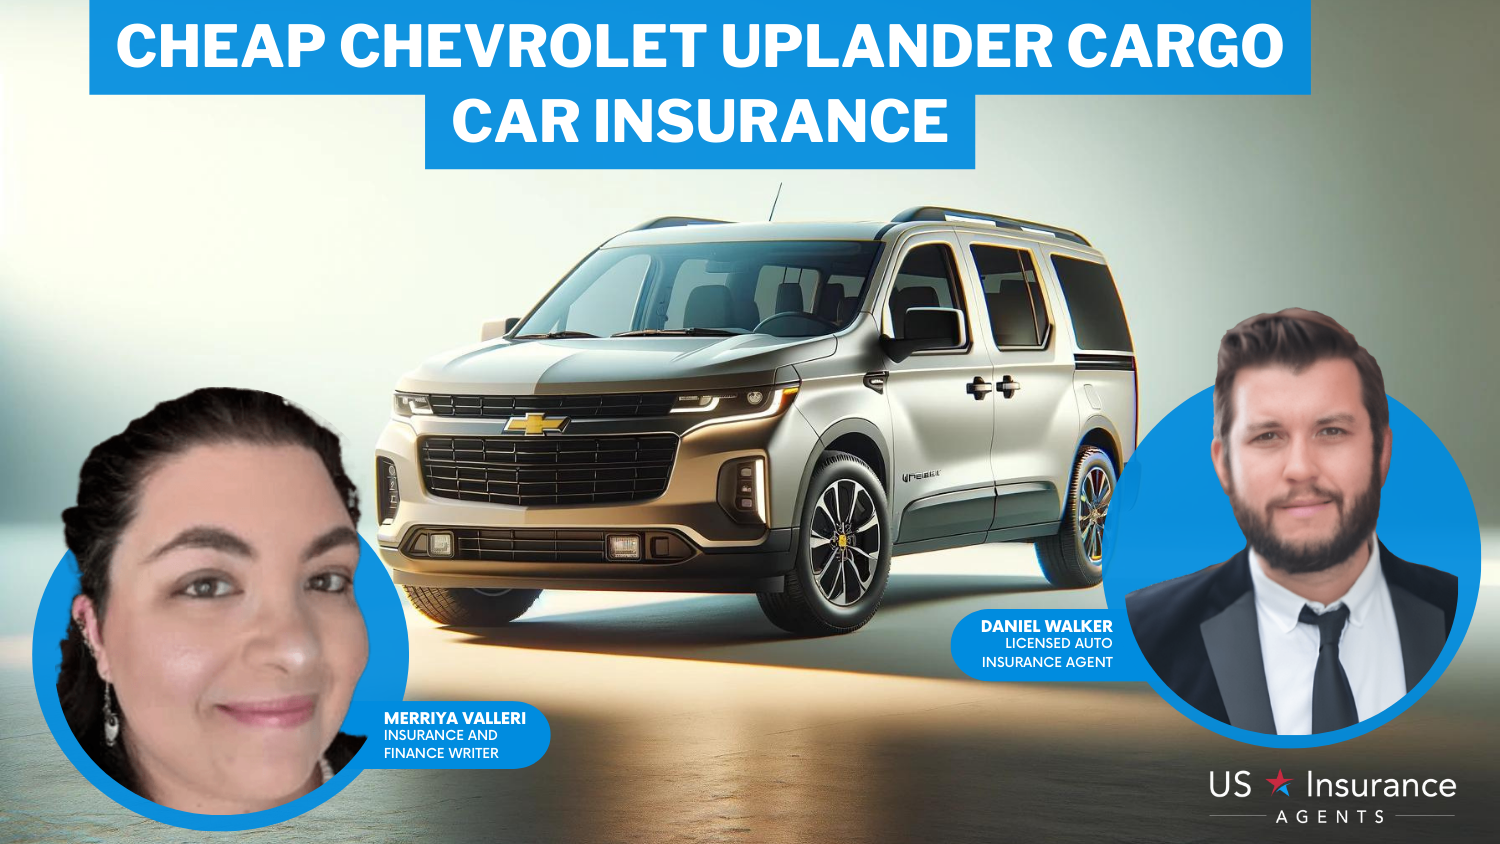 Cheap Chevrolet Uplander Cargo Car Insurance: USAA, Erie, and AAA.